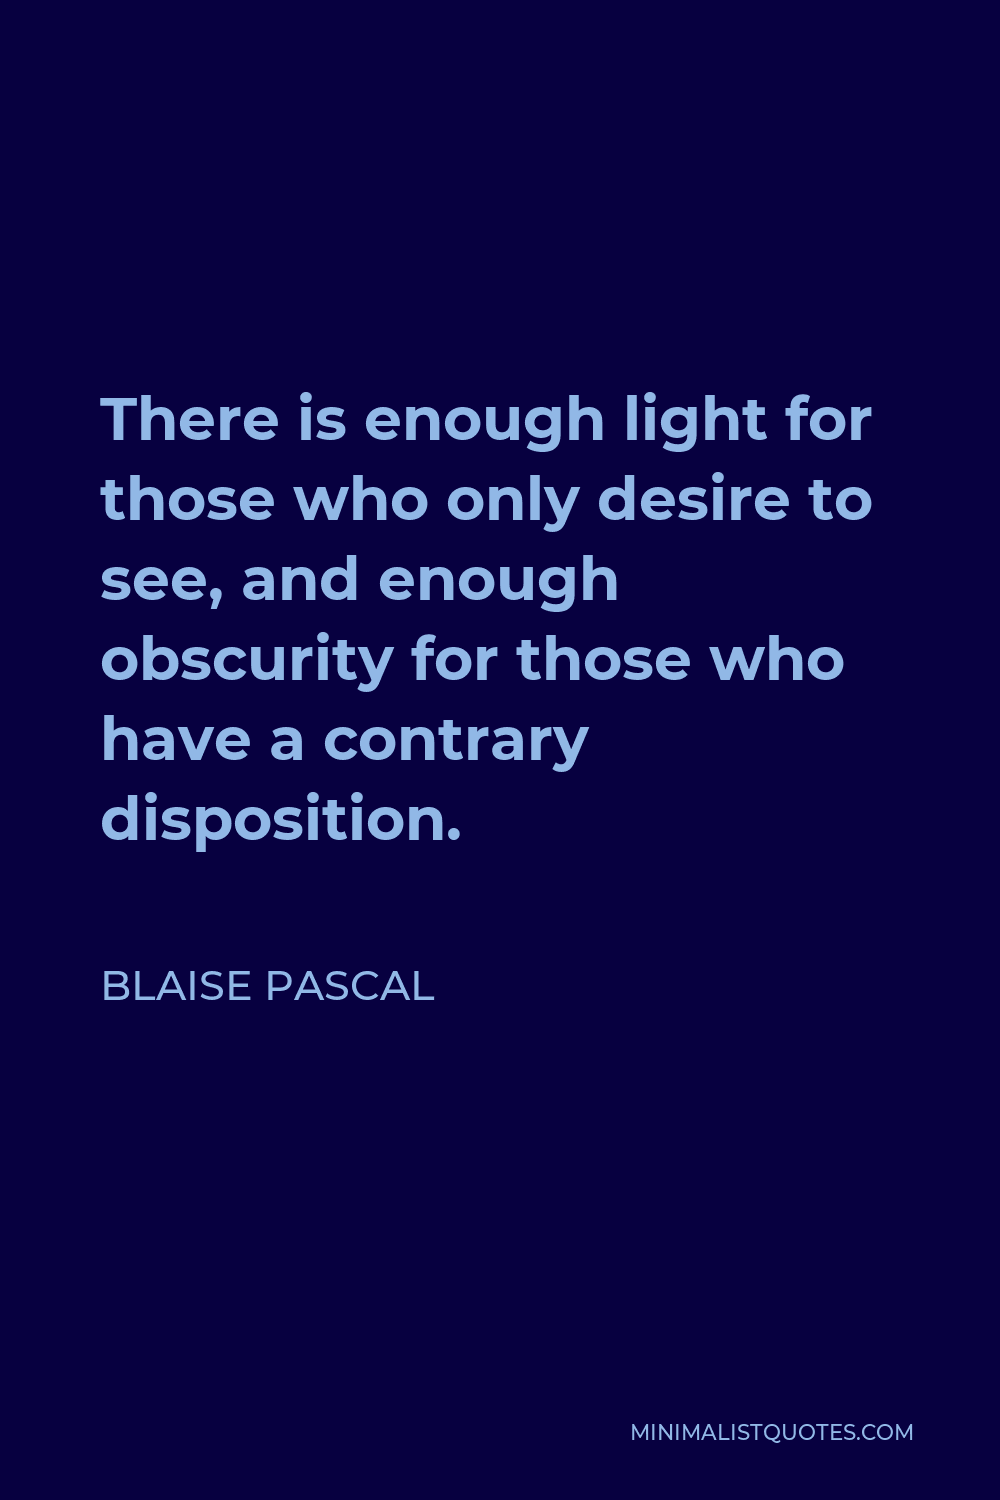 Blaise Pascal Quote - There is enough light for those who only desire to see, and enough obscurity for those who have a contrary disposition.